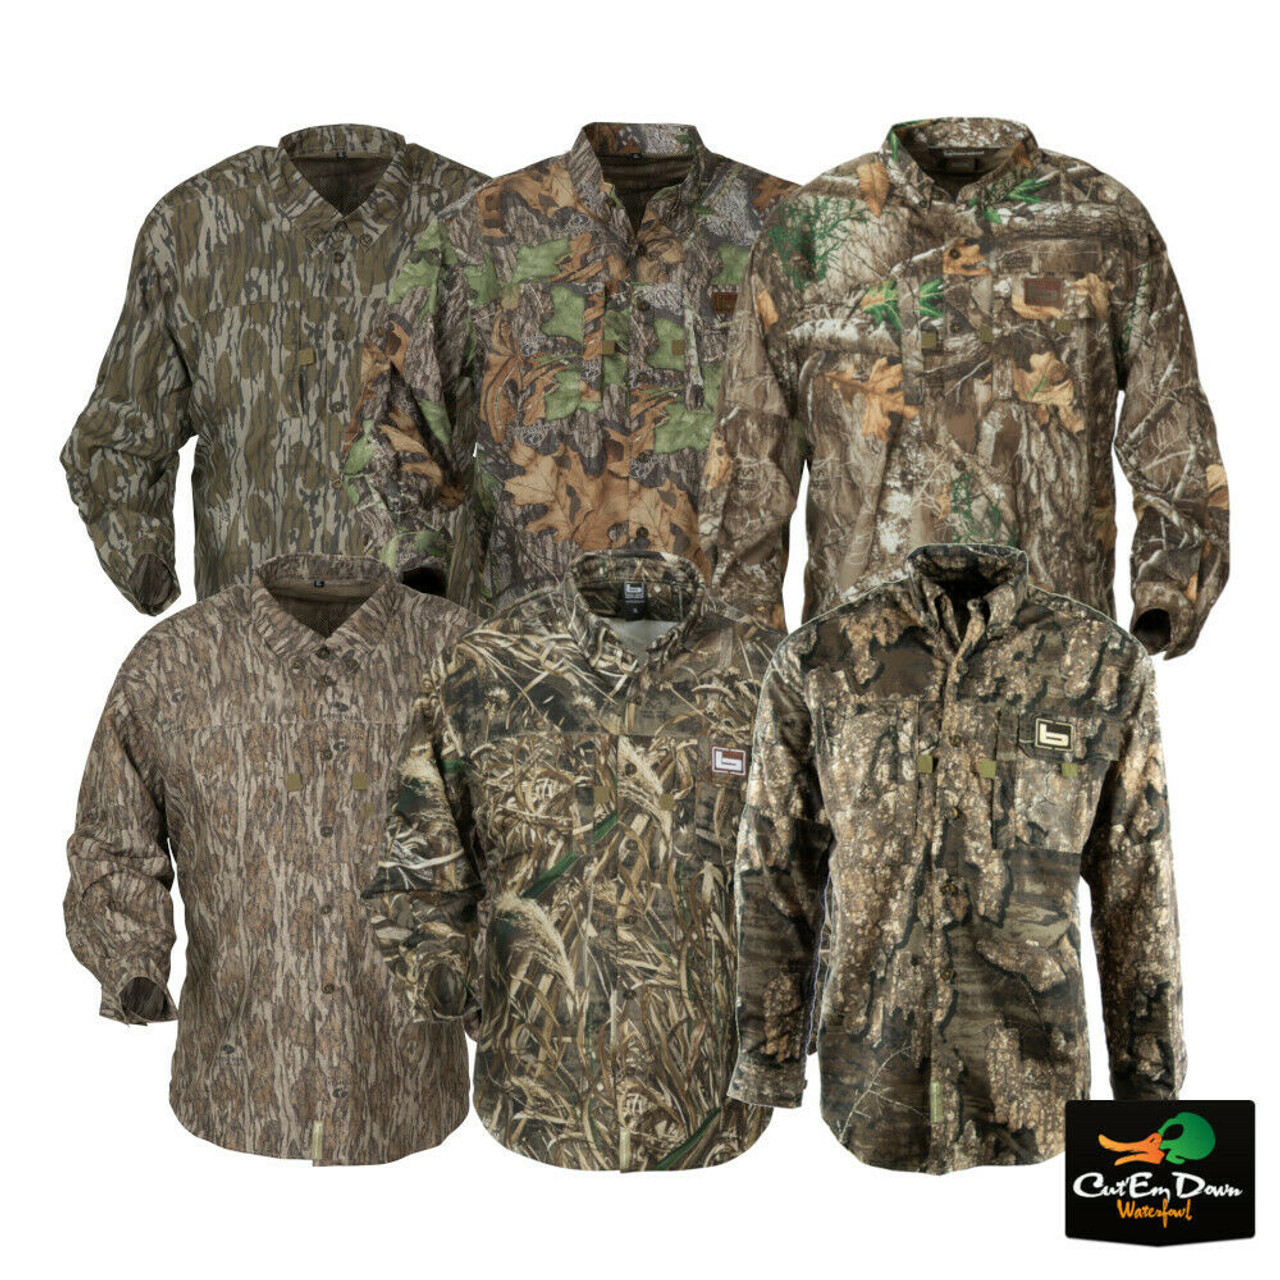 BANDED GEAR MID WEIGHT HUNTING SHIRT